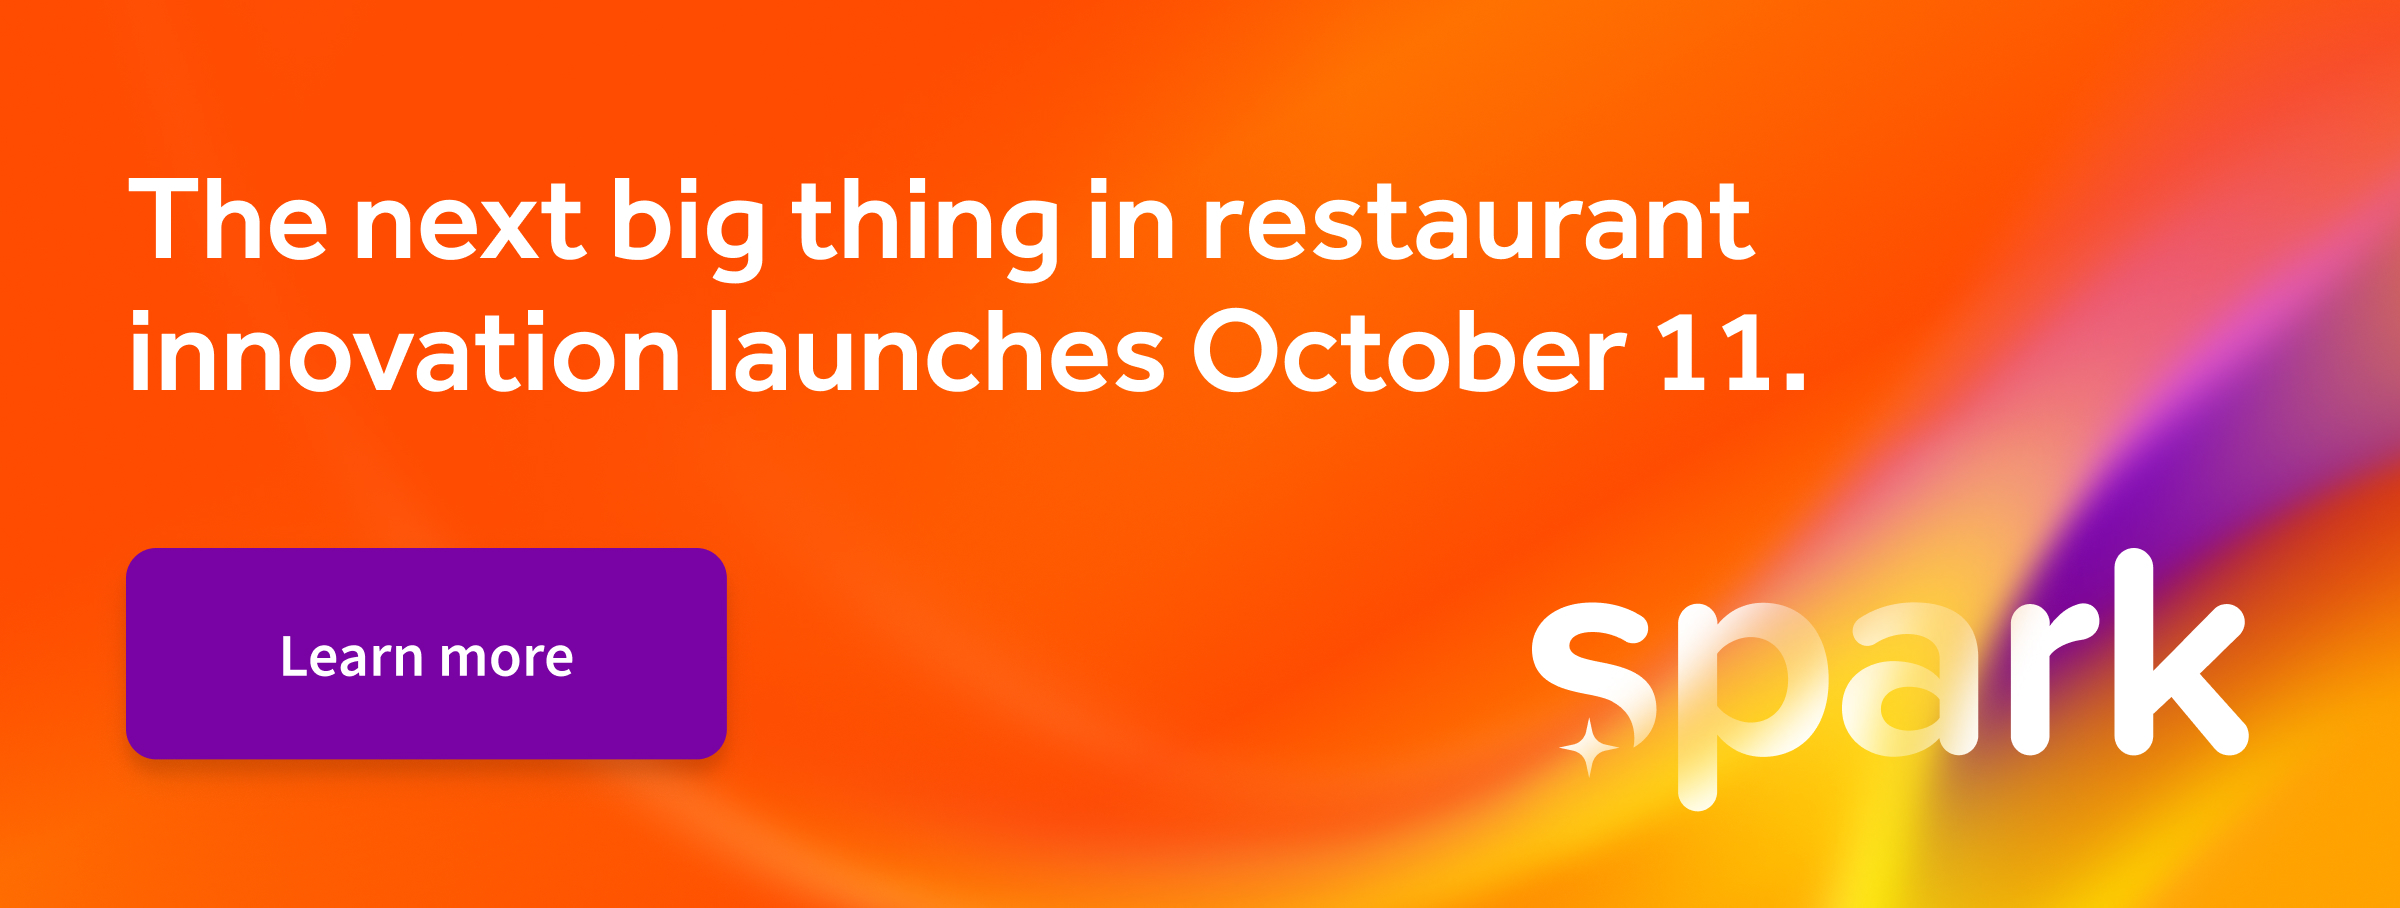 image promotion Spark, a restaurant innovation event from Toast